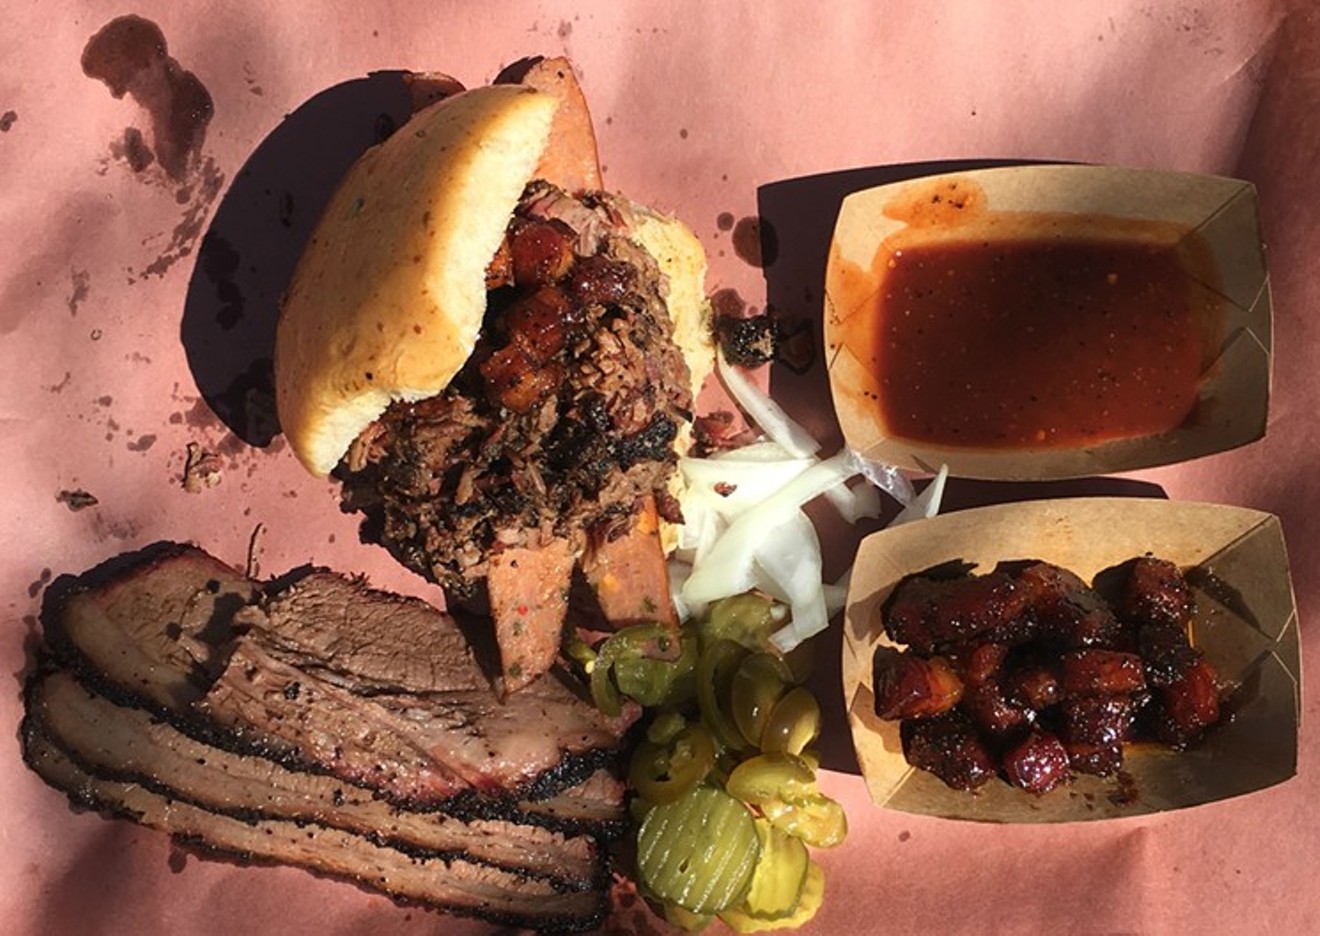 Heim Barbecue opened a new restaurant today with new menu offerings like brisket fat tortillas.